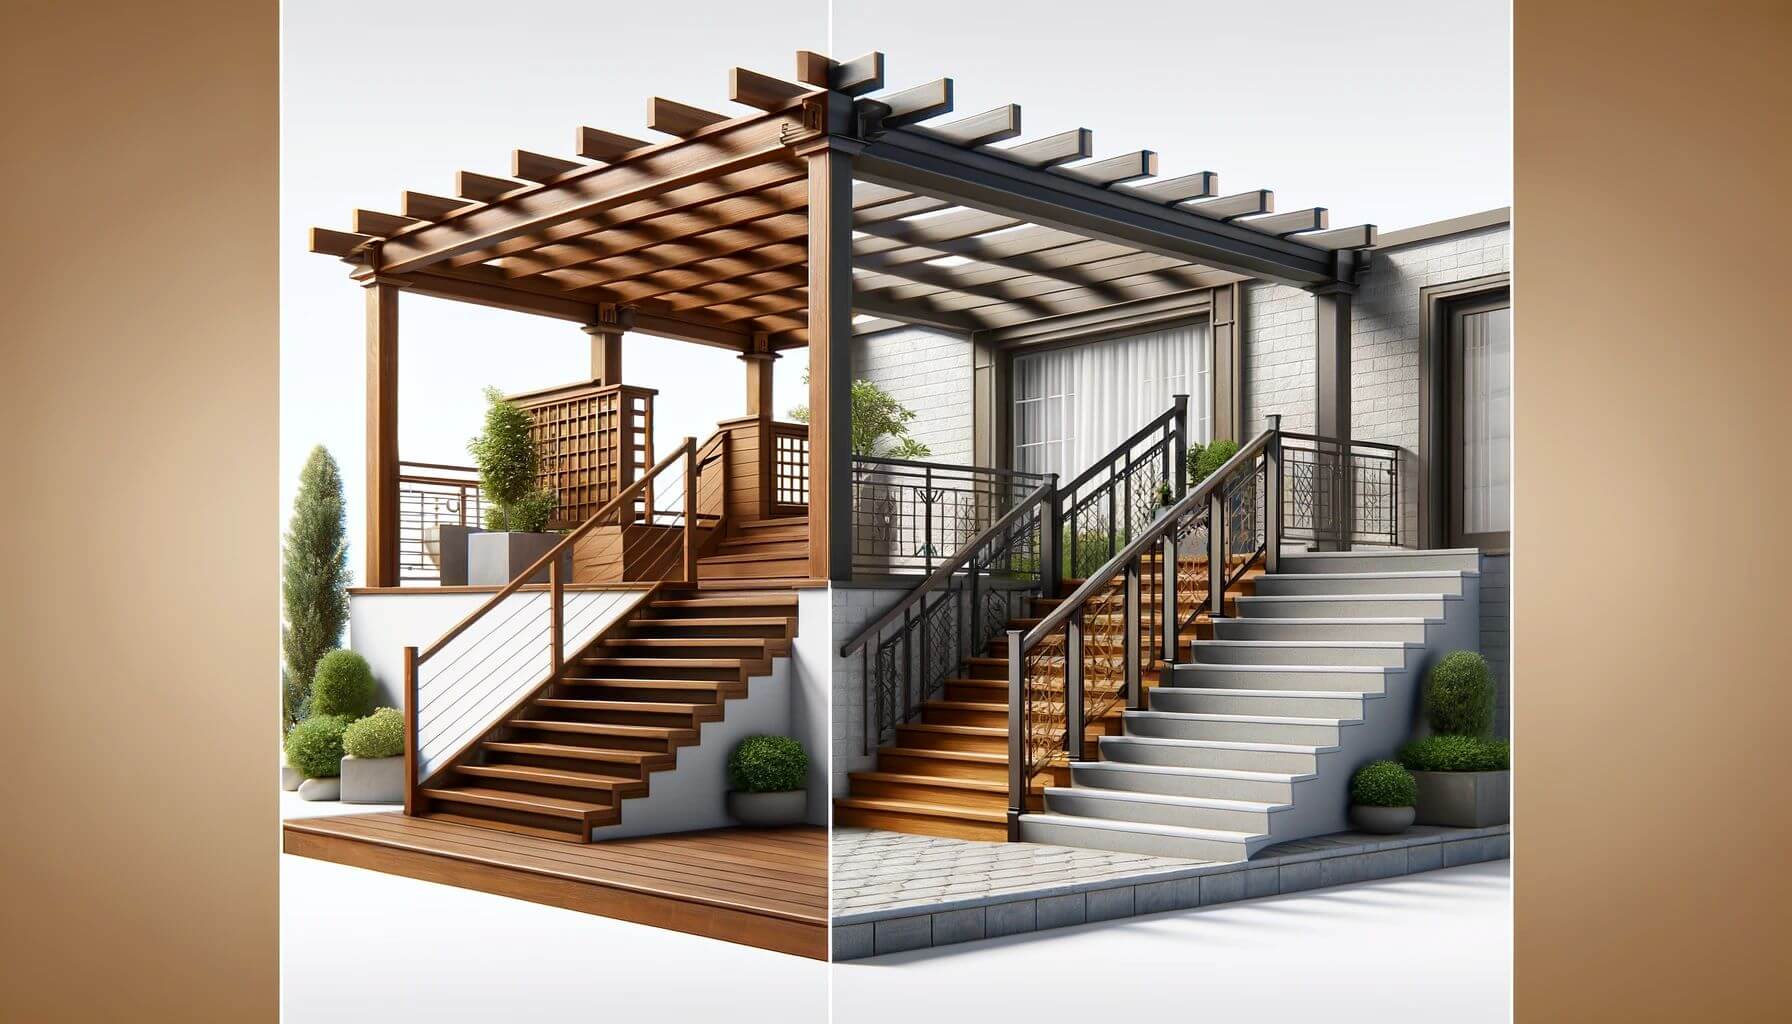 A Pergolas for Every Staircase integrated with staircase materials for a cohesive look